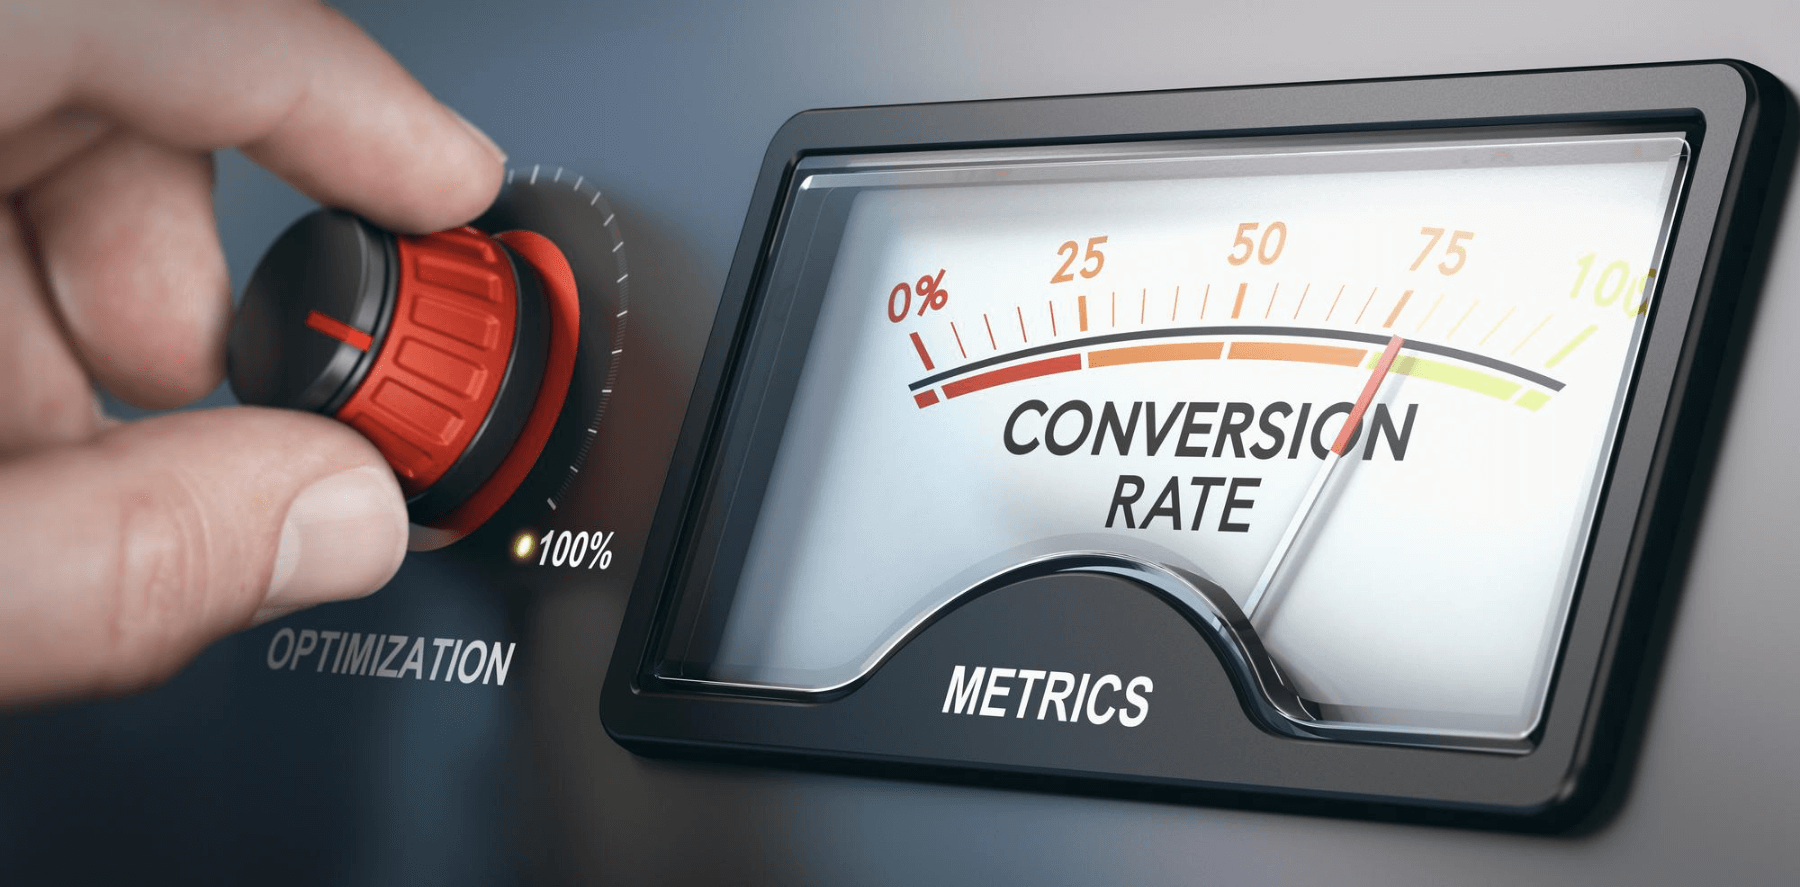 Excellent business storytelling leads to even better conversion rate